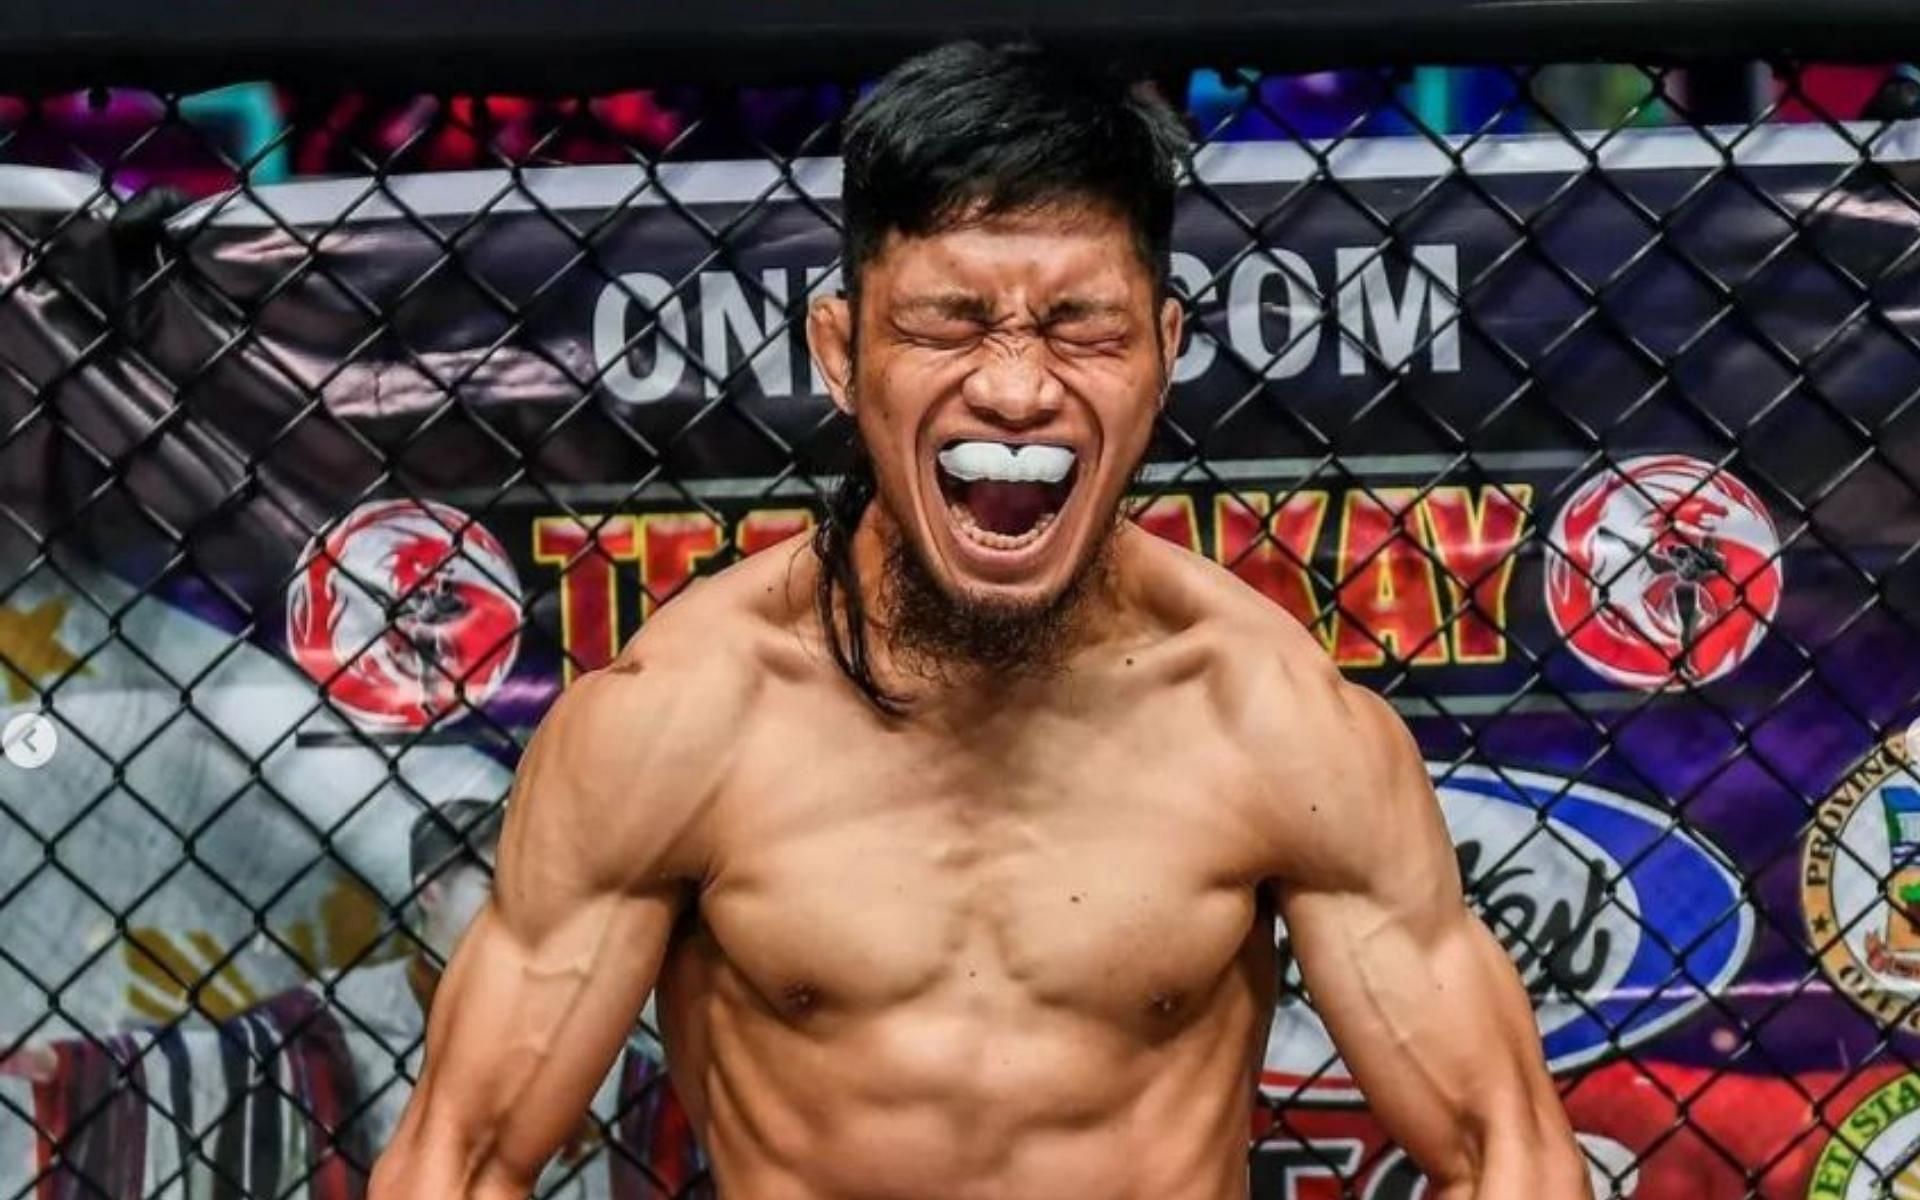 ONE Championship star Lito Adiwang produced one of the best knockouts of the year against Namiki Kawahara [Image Courtesy: @litoadiwang on Instagram]